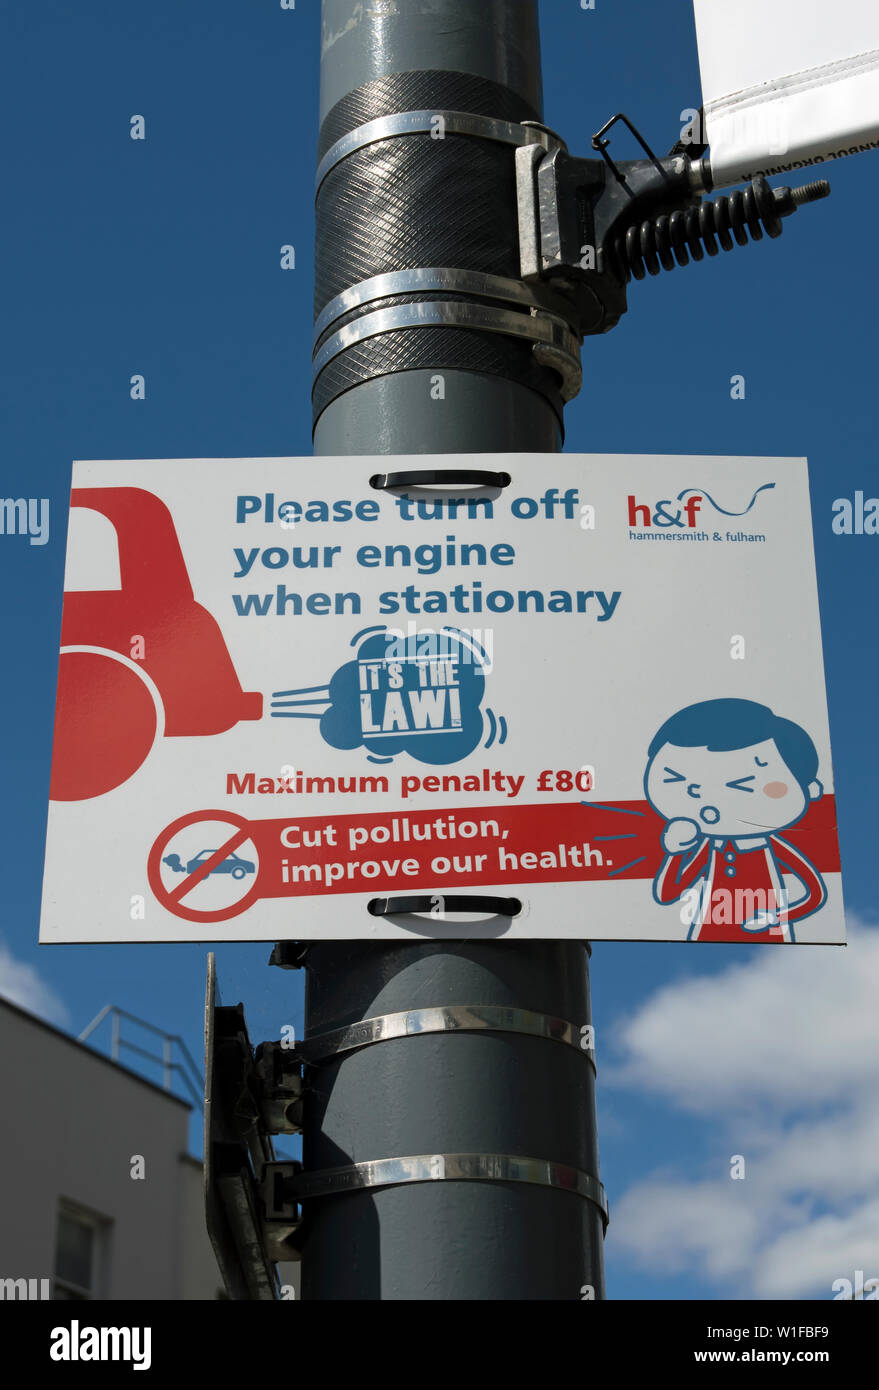 street sign from hammersmith and fulham council, london, england, reminding drivers to turn their engines off when stationary Stock Photo